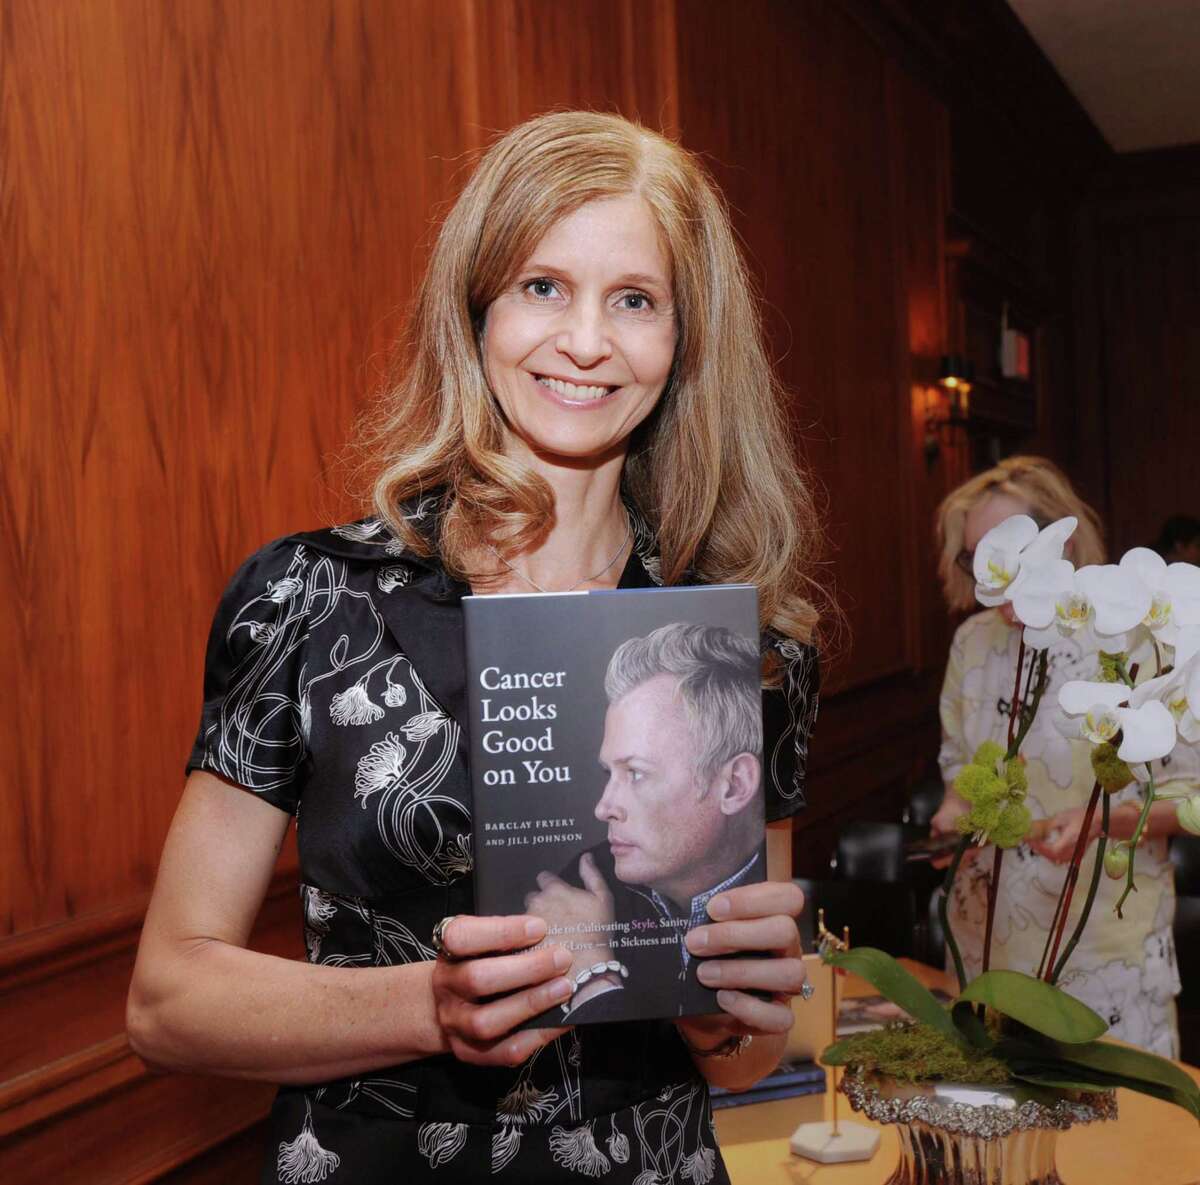 Jill Johnson holds the book “Cancer Looks Good on You,” that she co-wrote with the late Greenwich resident Barclay Fryery, a renowned interior designer, during a life celebration for Fryery and book launch event at the Greenwich Arts Council, Greenwich, Conn., Thursday night, June 29, 2017. Fryery died recently.